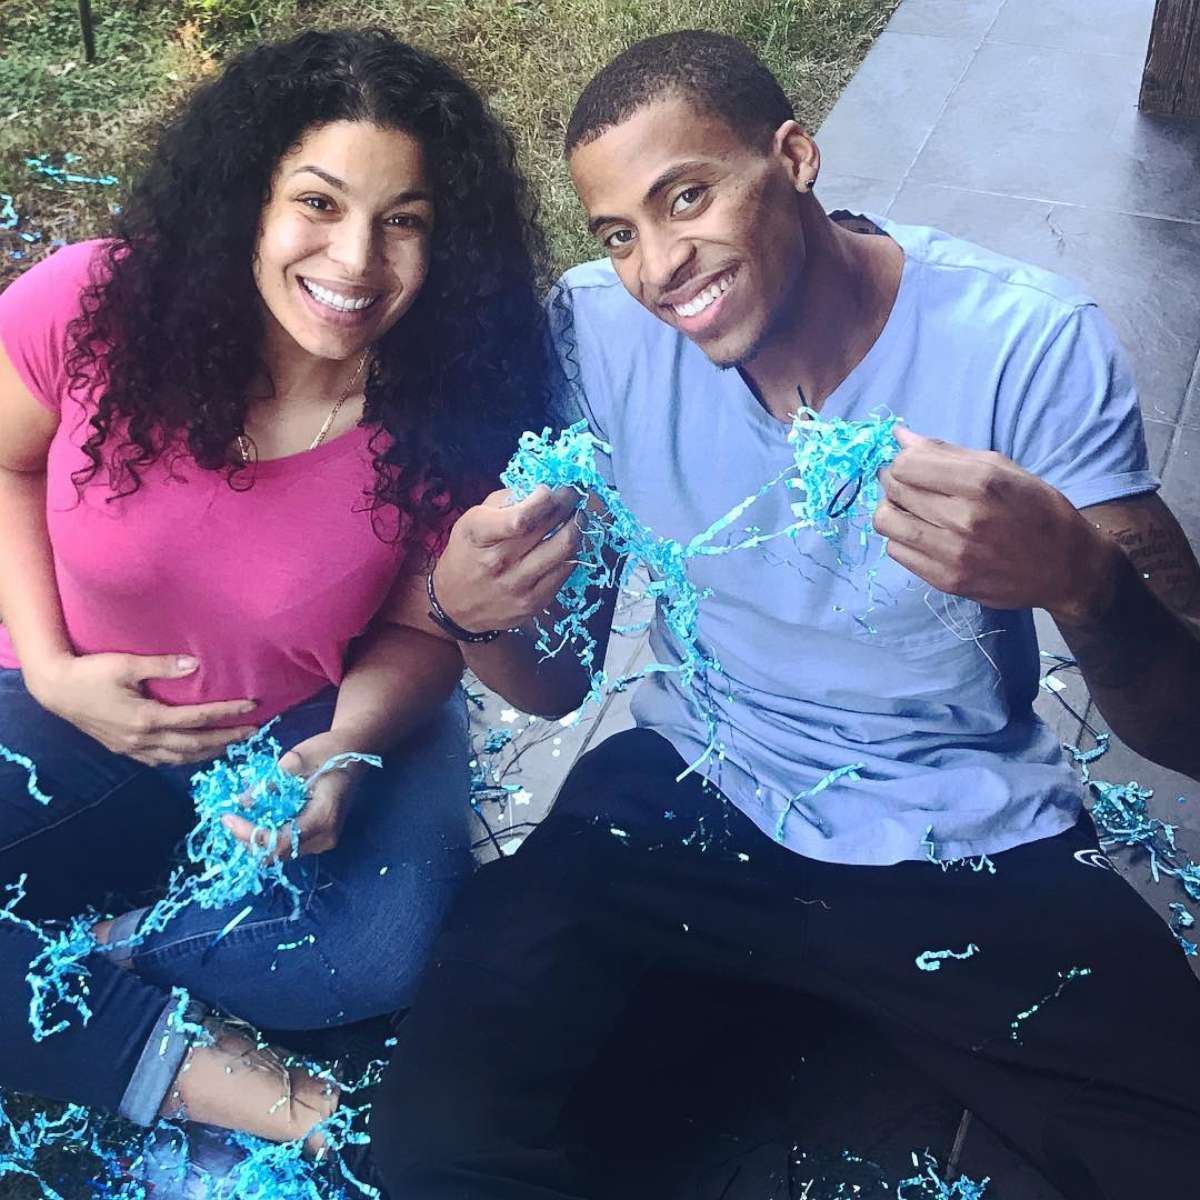 PHOTO: Jordin Sparks and boyfriend Dana Isaiah reveal they're expecting a baby boy in an Instagram photo posted on Nov. 23, 2017.